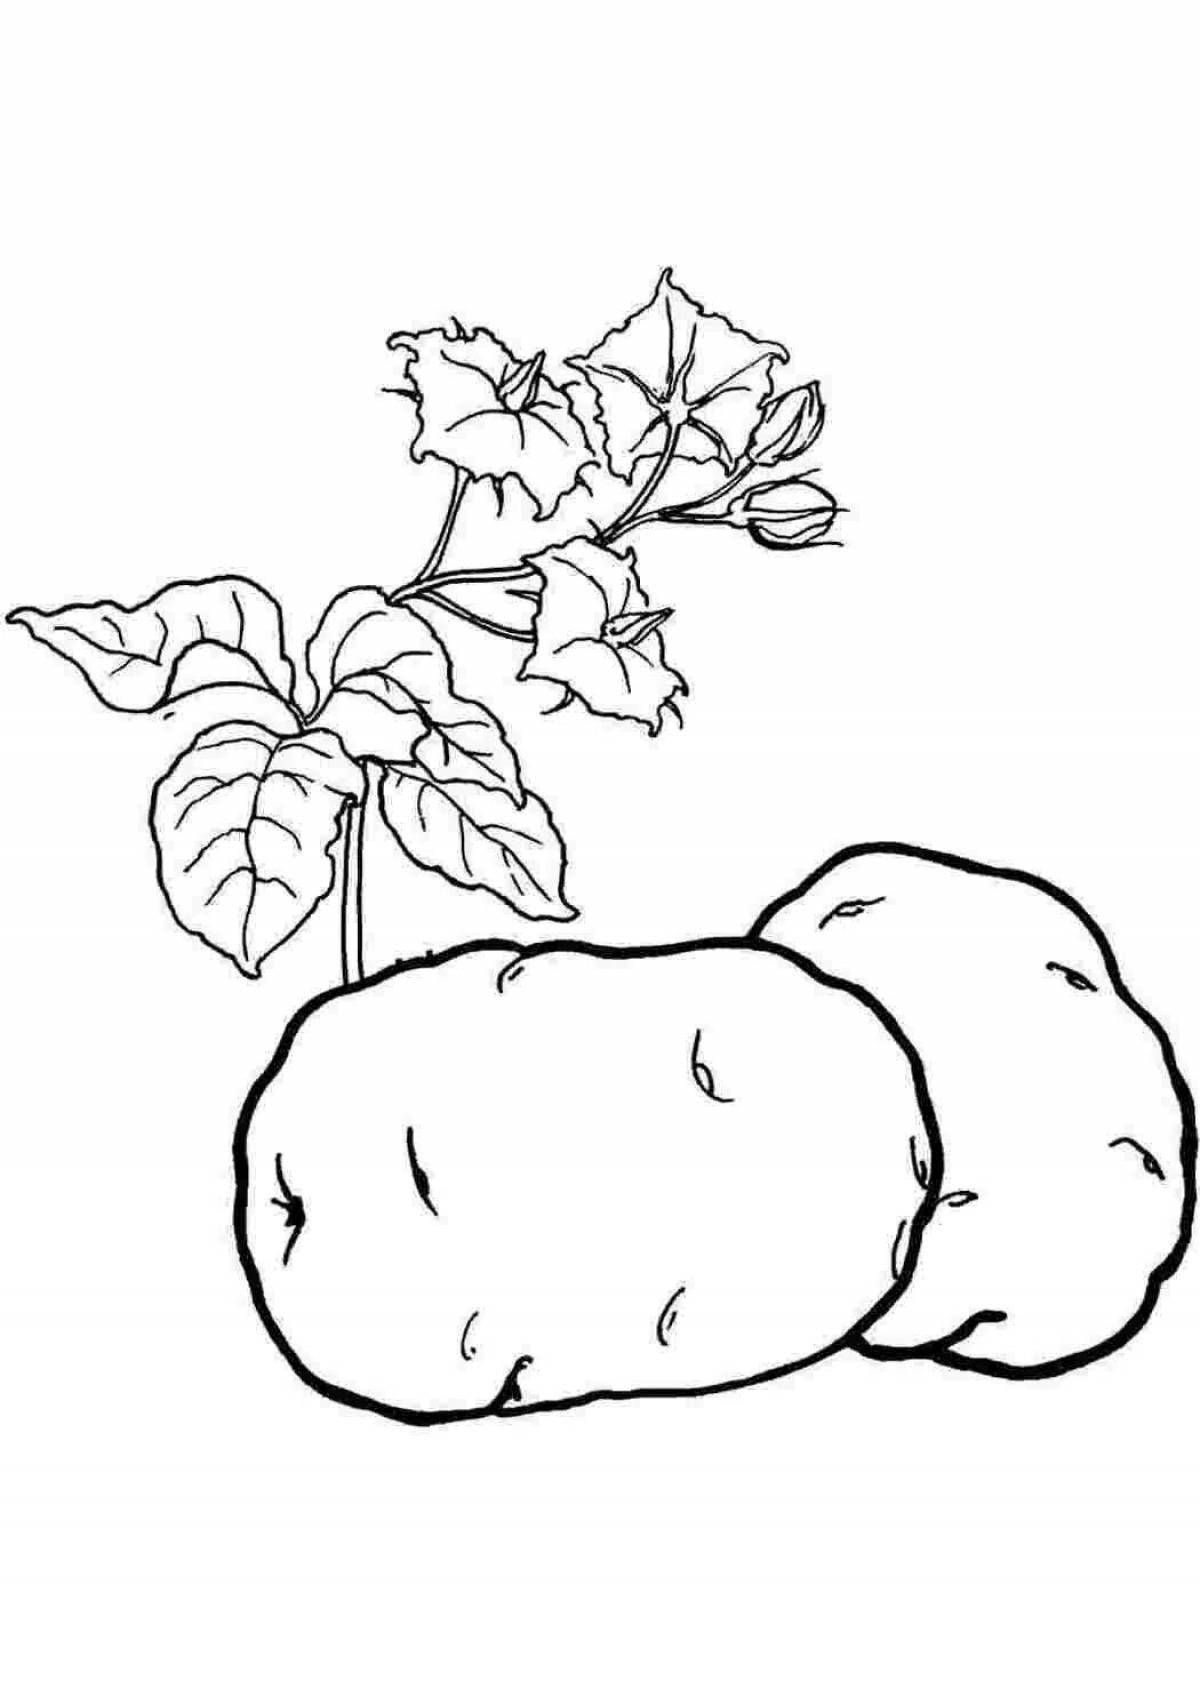 Glowing squash coloring page